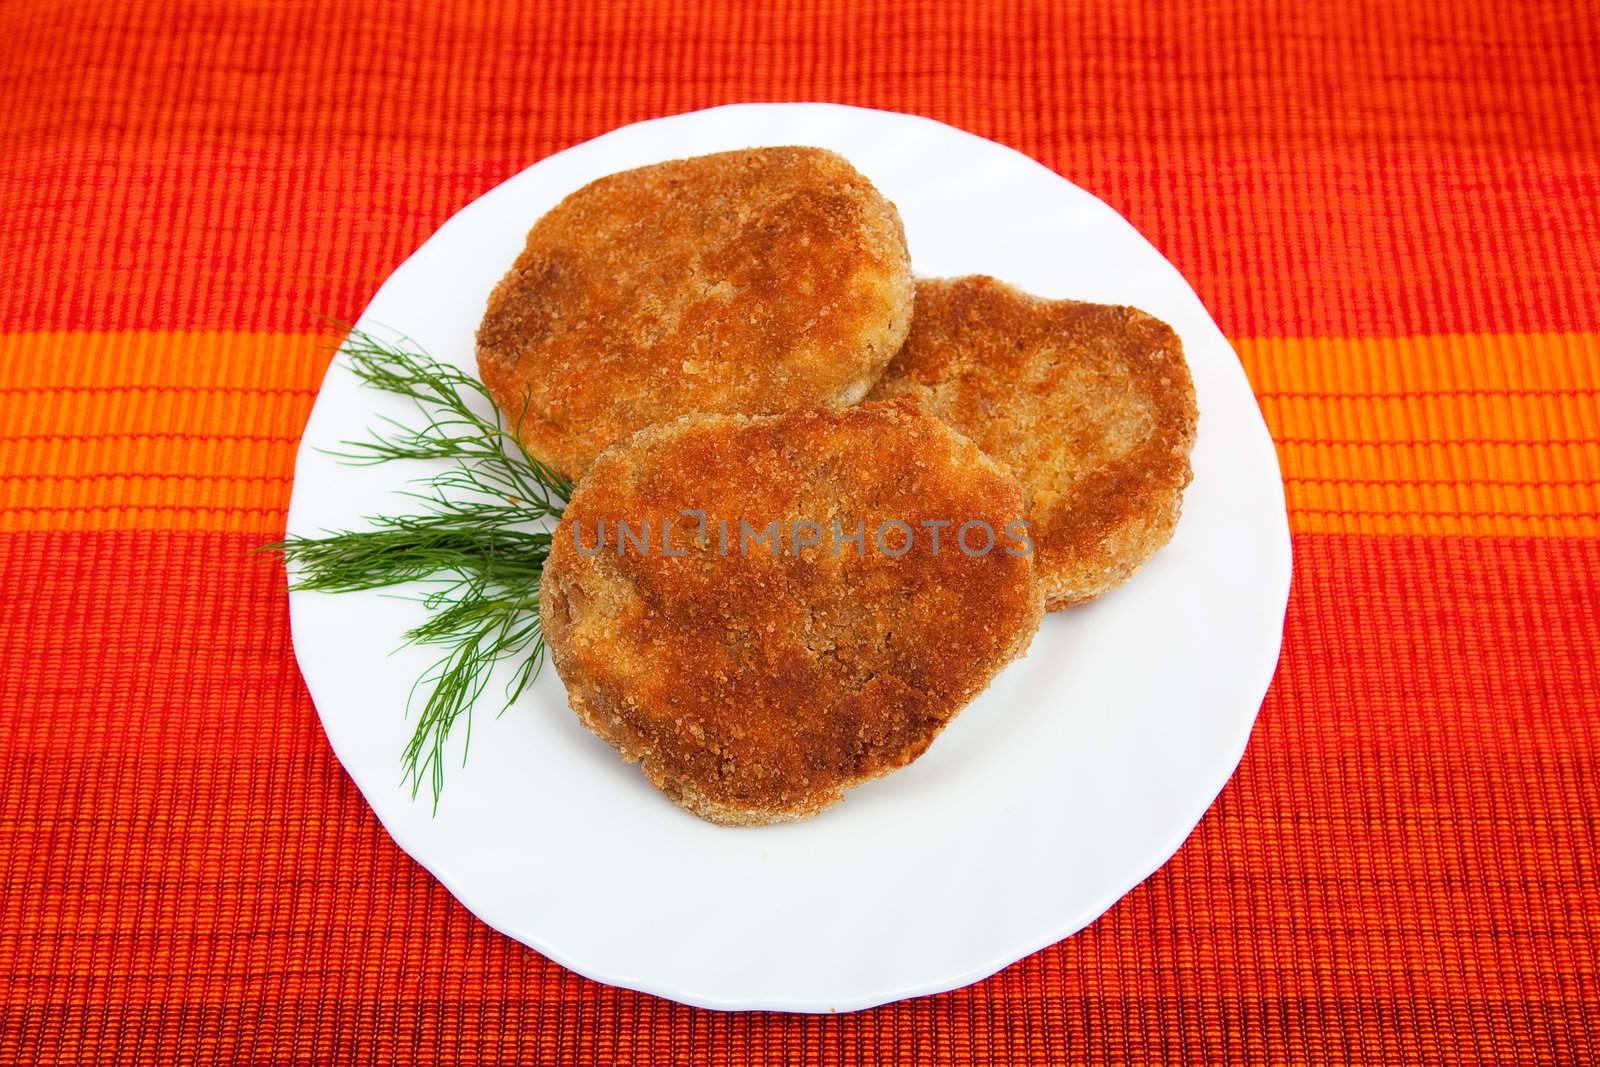 Three cutlets on the white plate